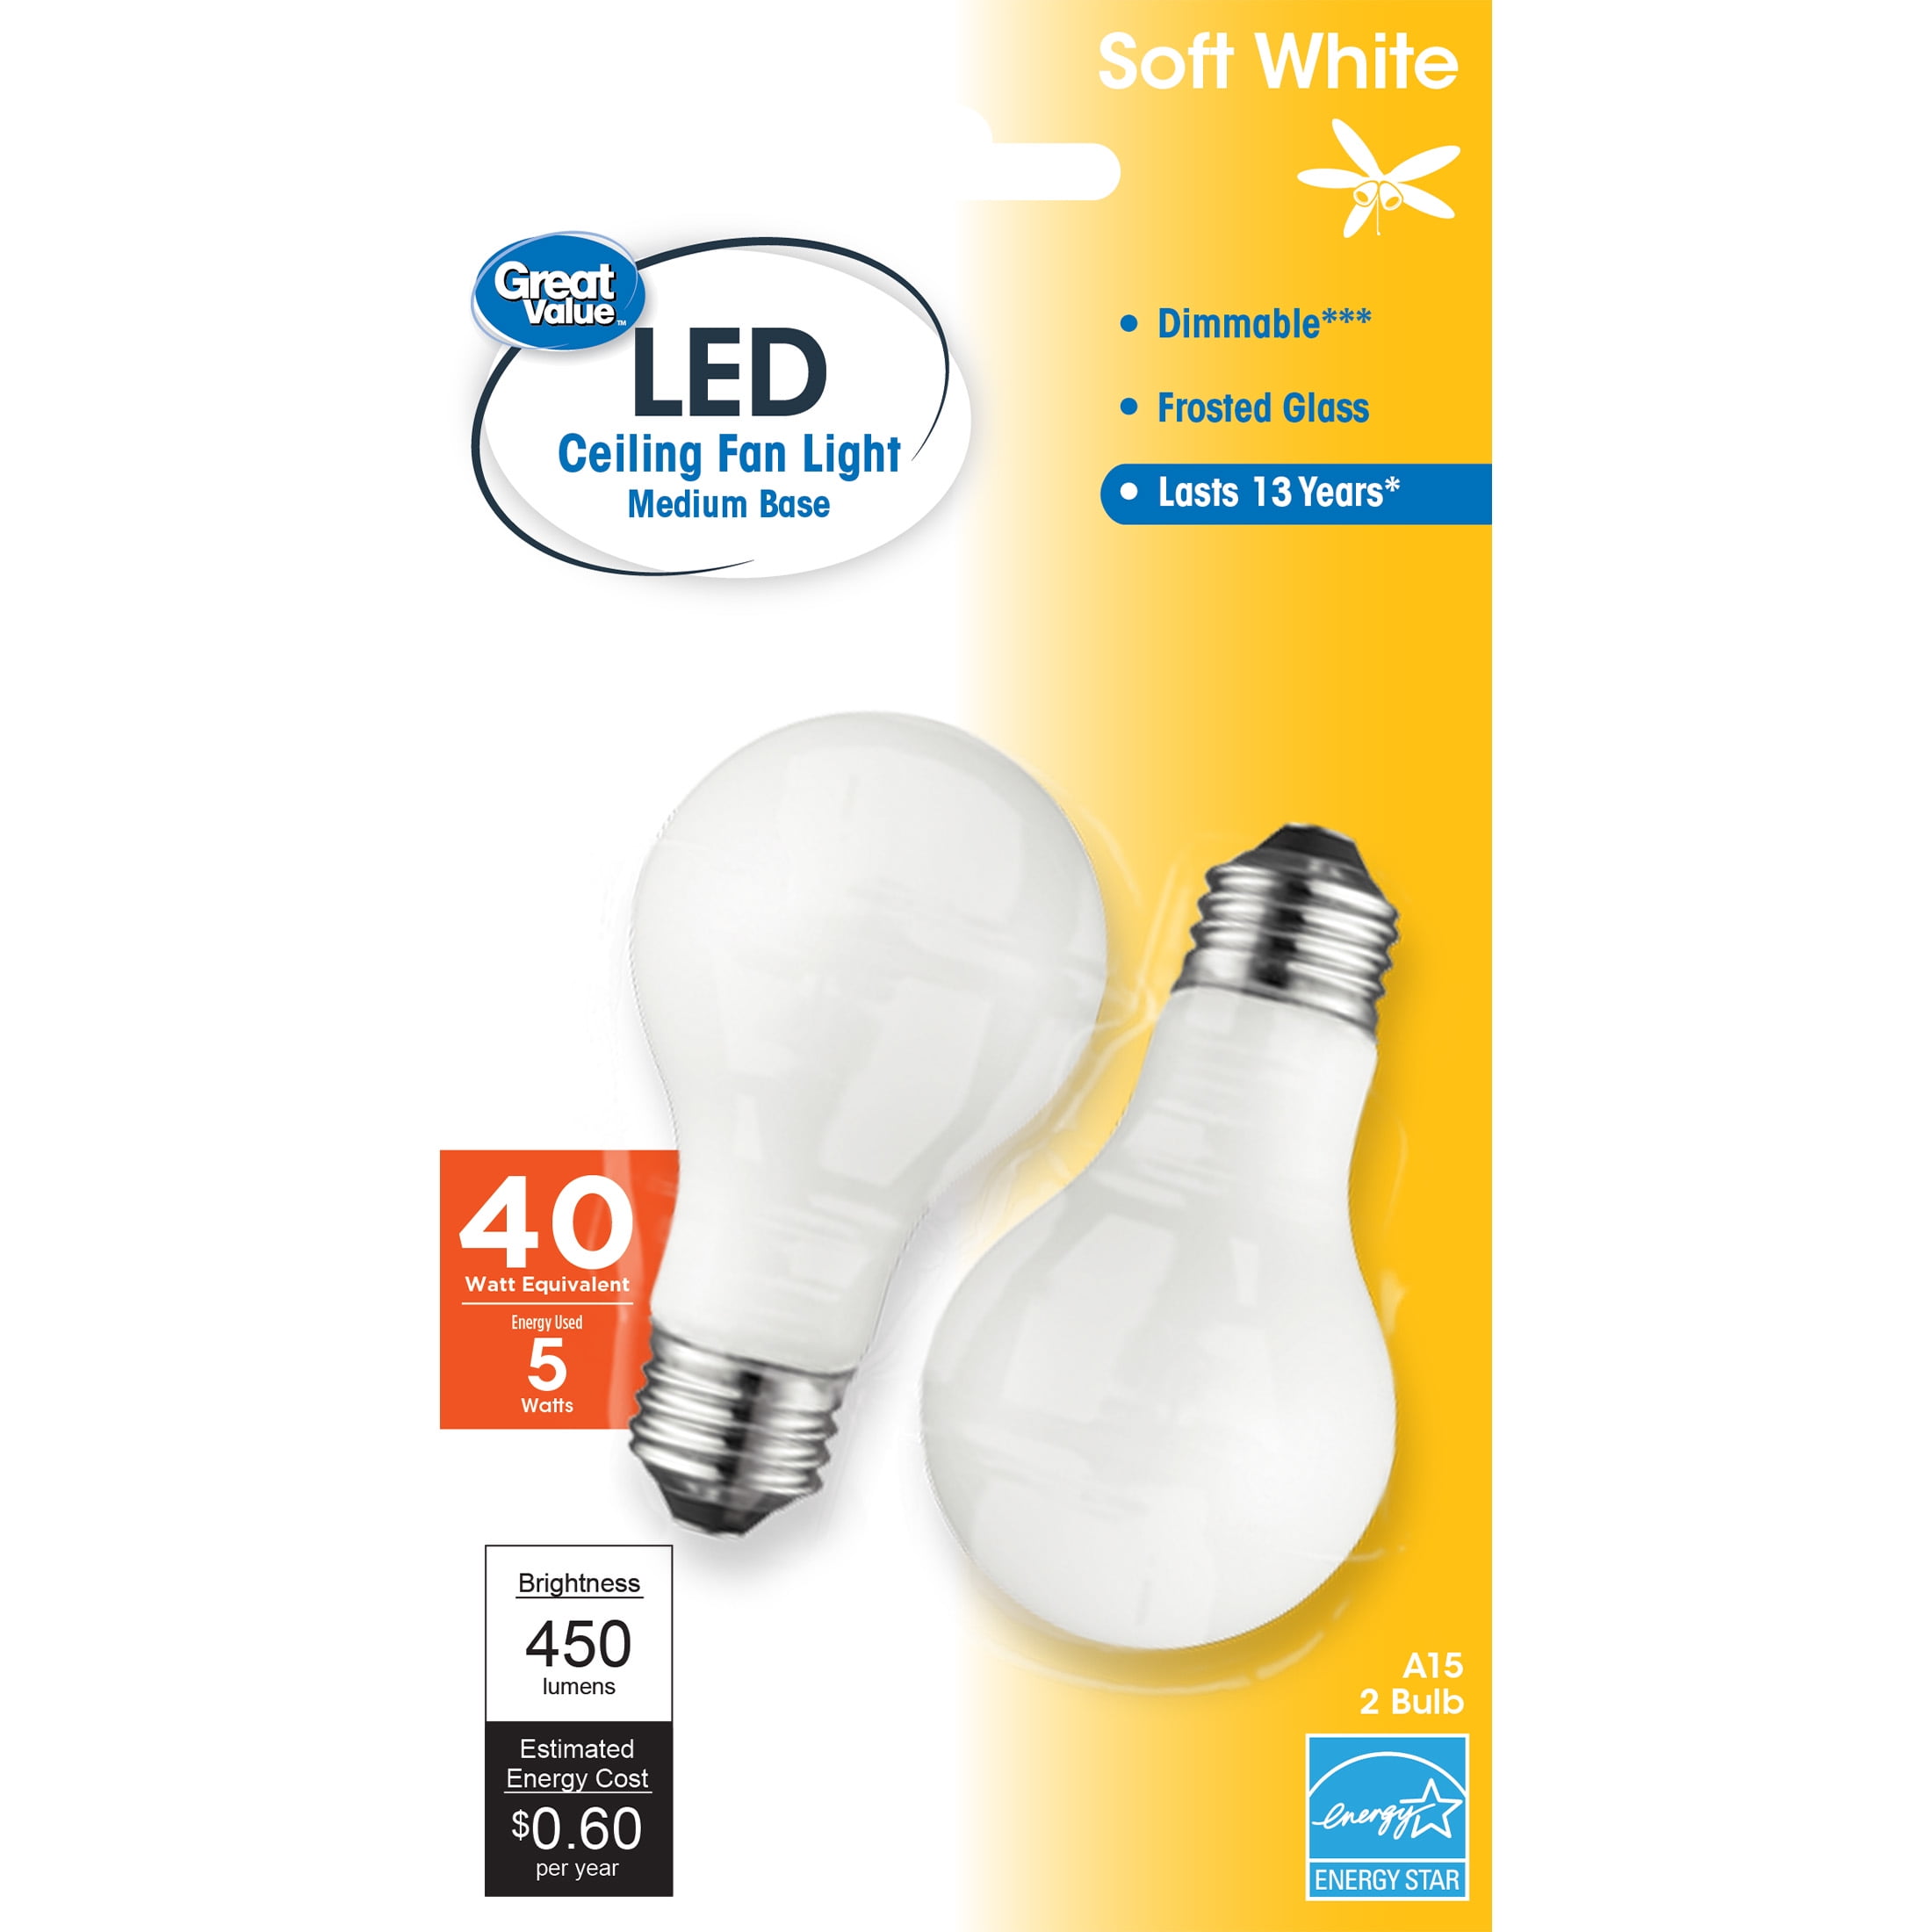 Great Value LED Light 5 Watts (40W Eqv.) A15 Ceiling Fan Frosted Lamp E26 Base, Soft White, 2-Pack - Walmart.com